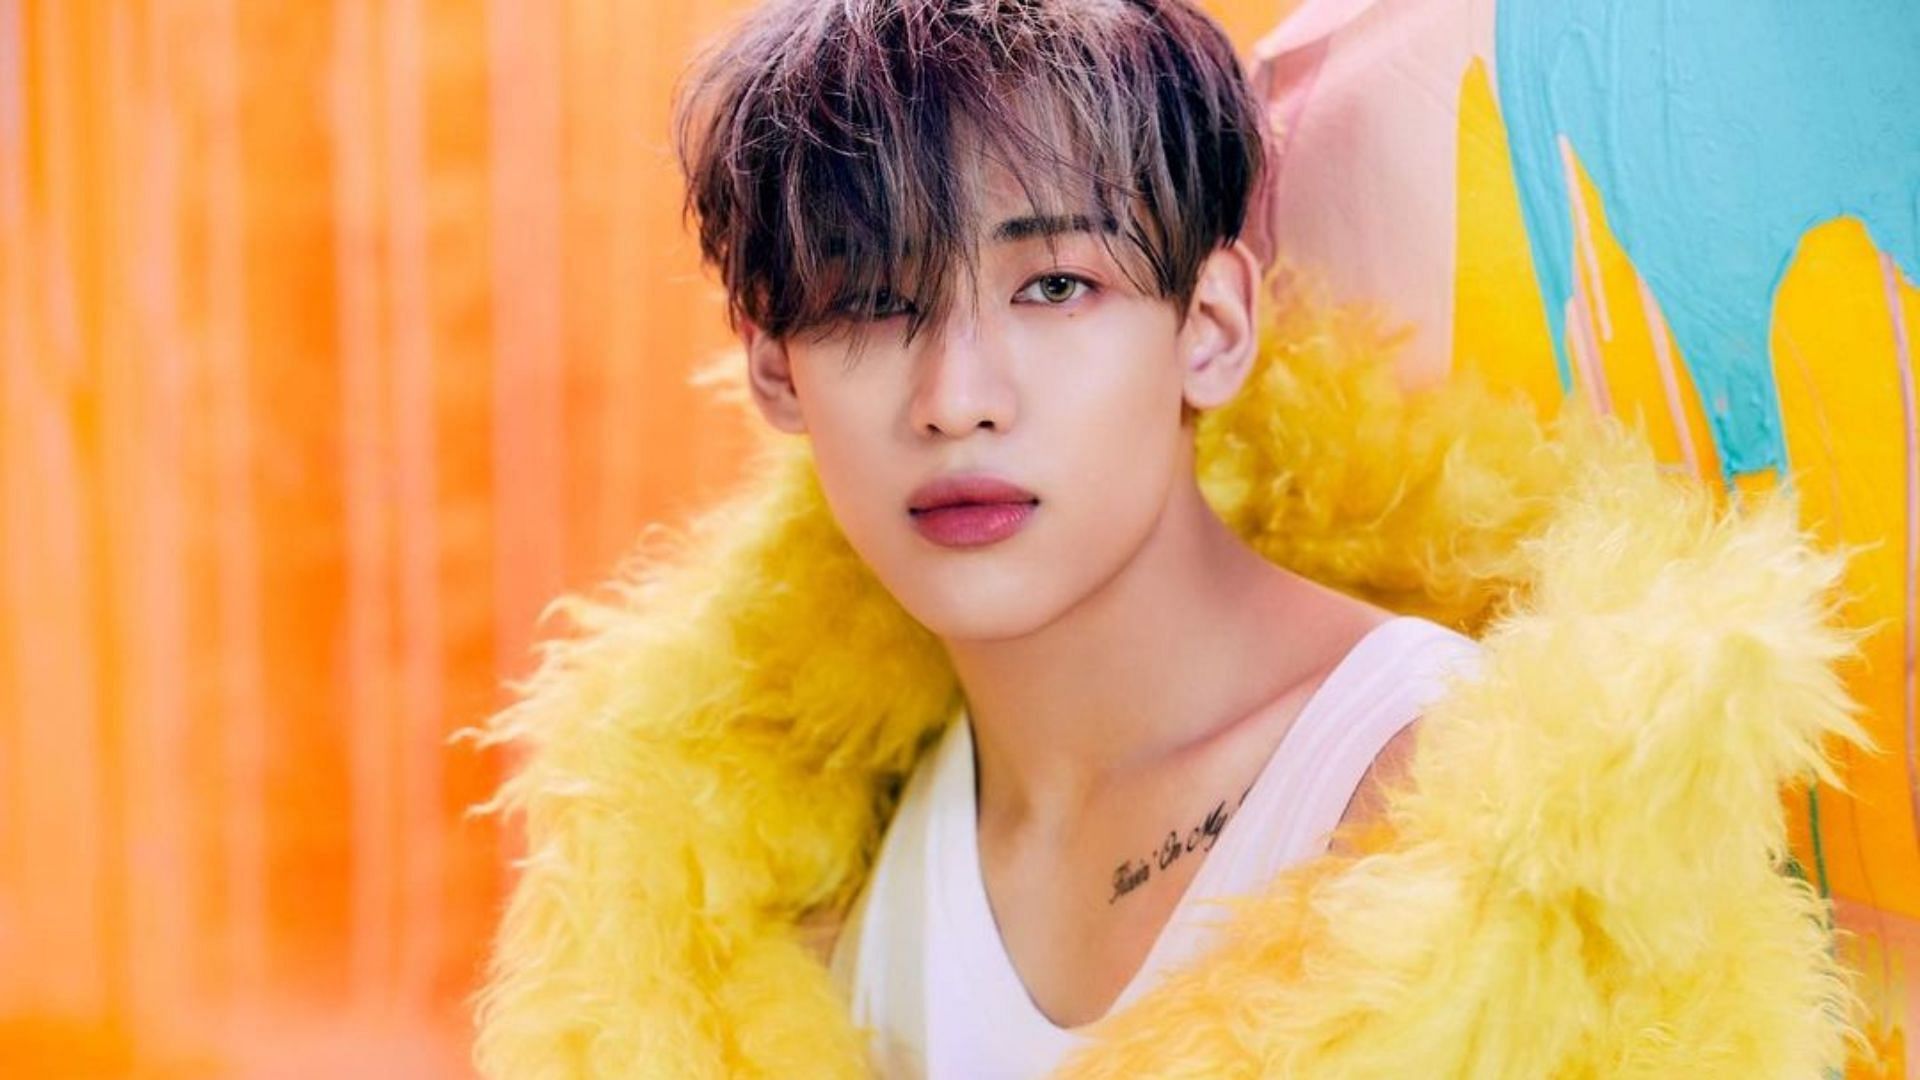 7. Bambam's Blonde Hair: The Pros and Cons of Going Light - wide 5